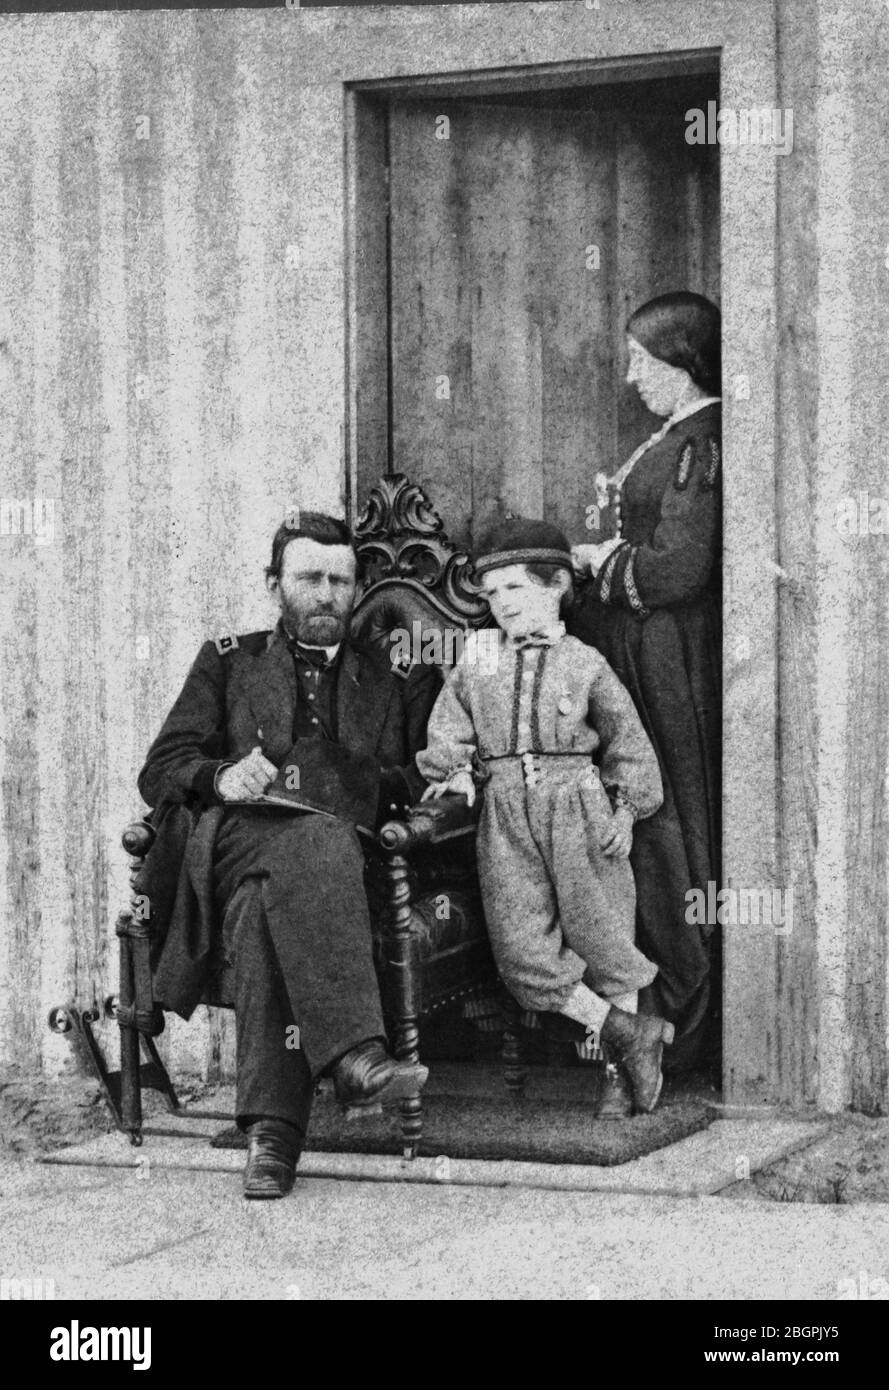 Lieutenant General Ulysses S. Grant (1822-1885) with his wife, Julia Boggs Grant (1848-1902), and son, Frederick Dent Grant (1850-1912), in 1864. During the American Civil War, Grant became the commander of all northern armies. Later be became President of the United States. Years later, when he found out he was dying, he wrote his autobiography, which sold extremely well, thereby supporting his family for decades.  To see my Civil War-related images, Search:  Prestor  vintage  Civil Stock Photo